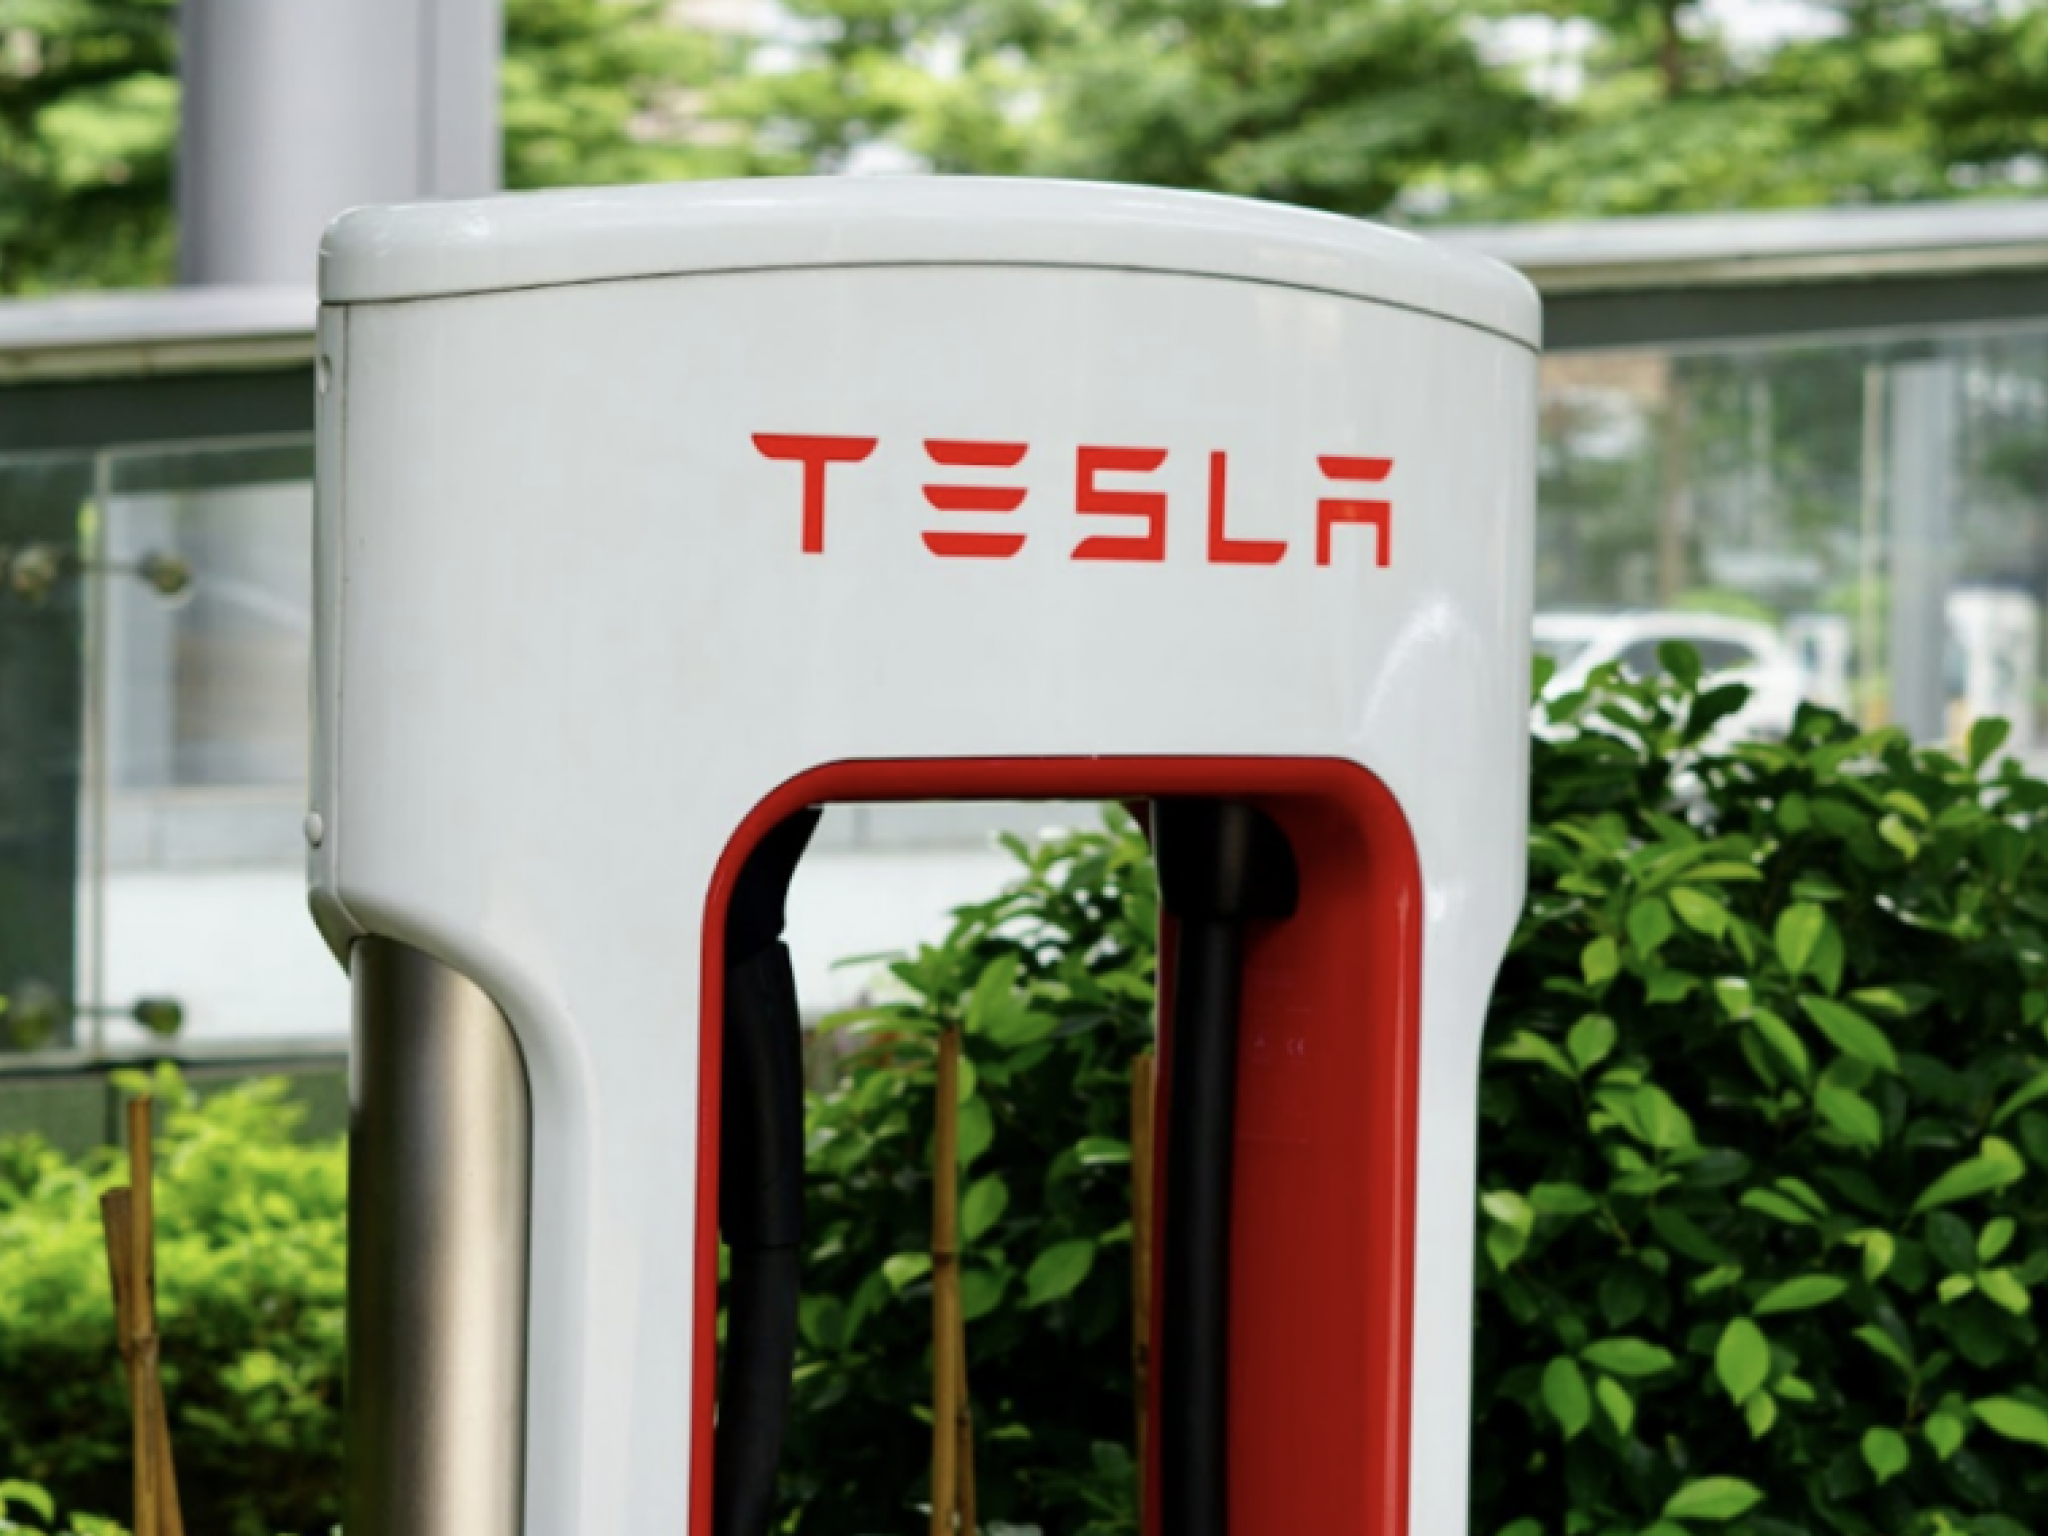  tesla-drops-after-missed-earnings-why-is-cathie-wood-gobbling-up-shares 